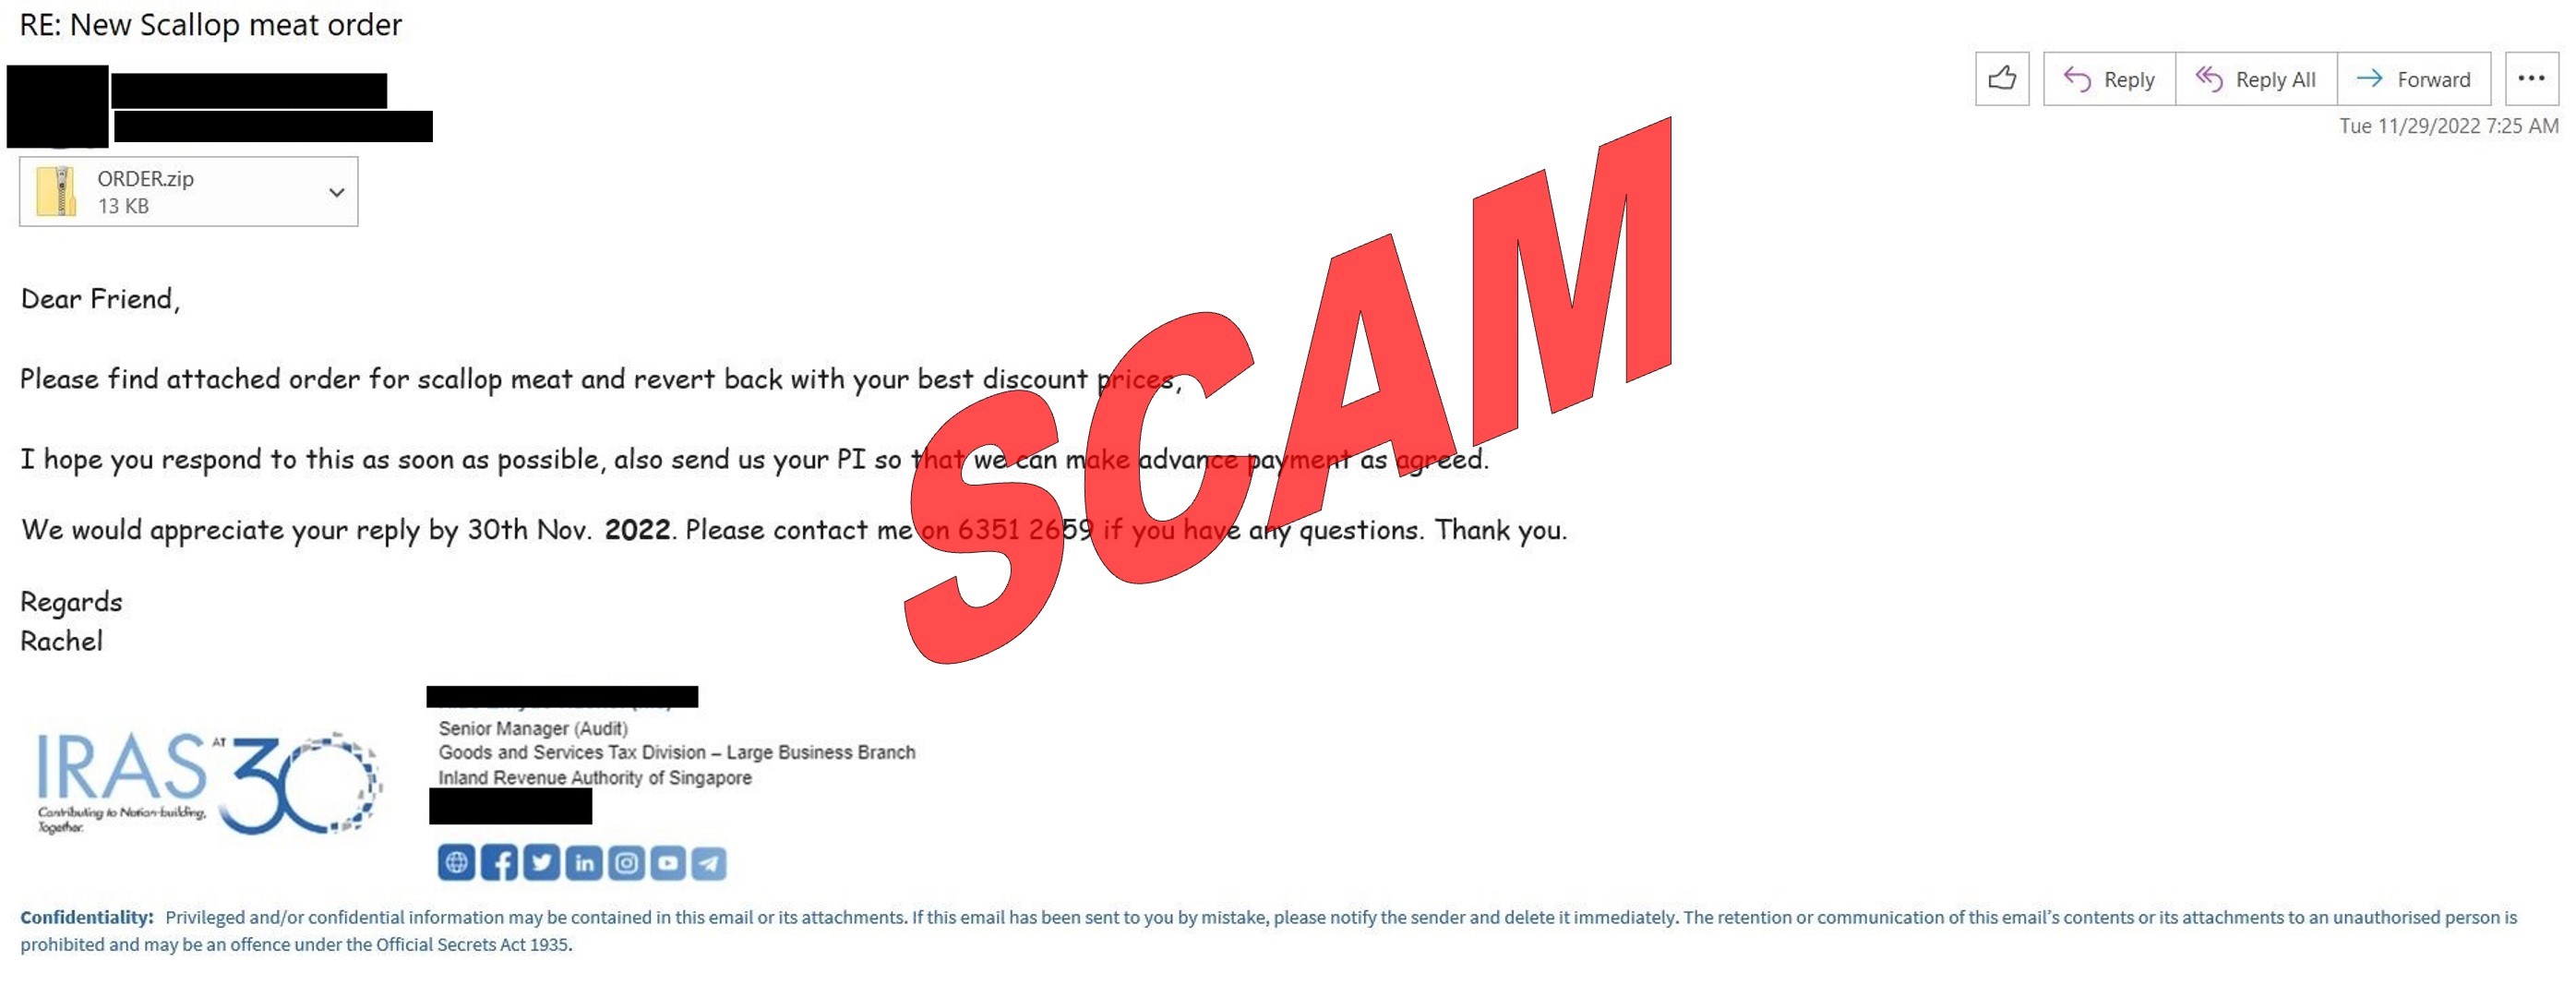 Image showing a spoofed IRAS email containing malicious content